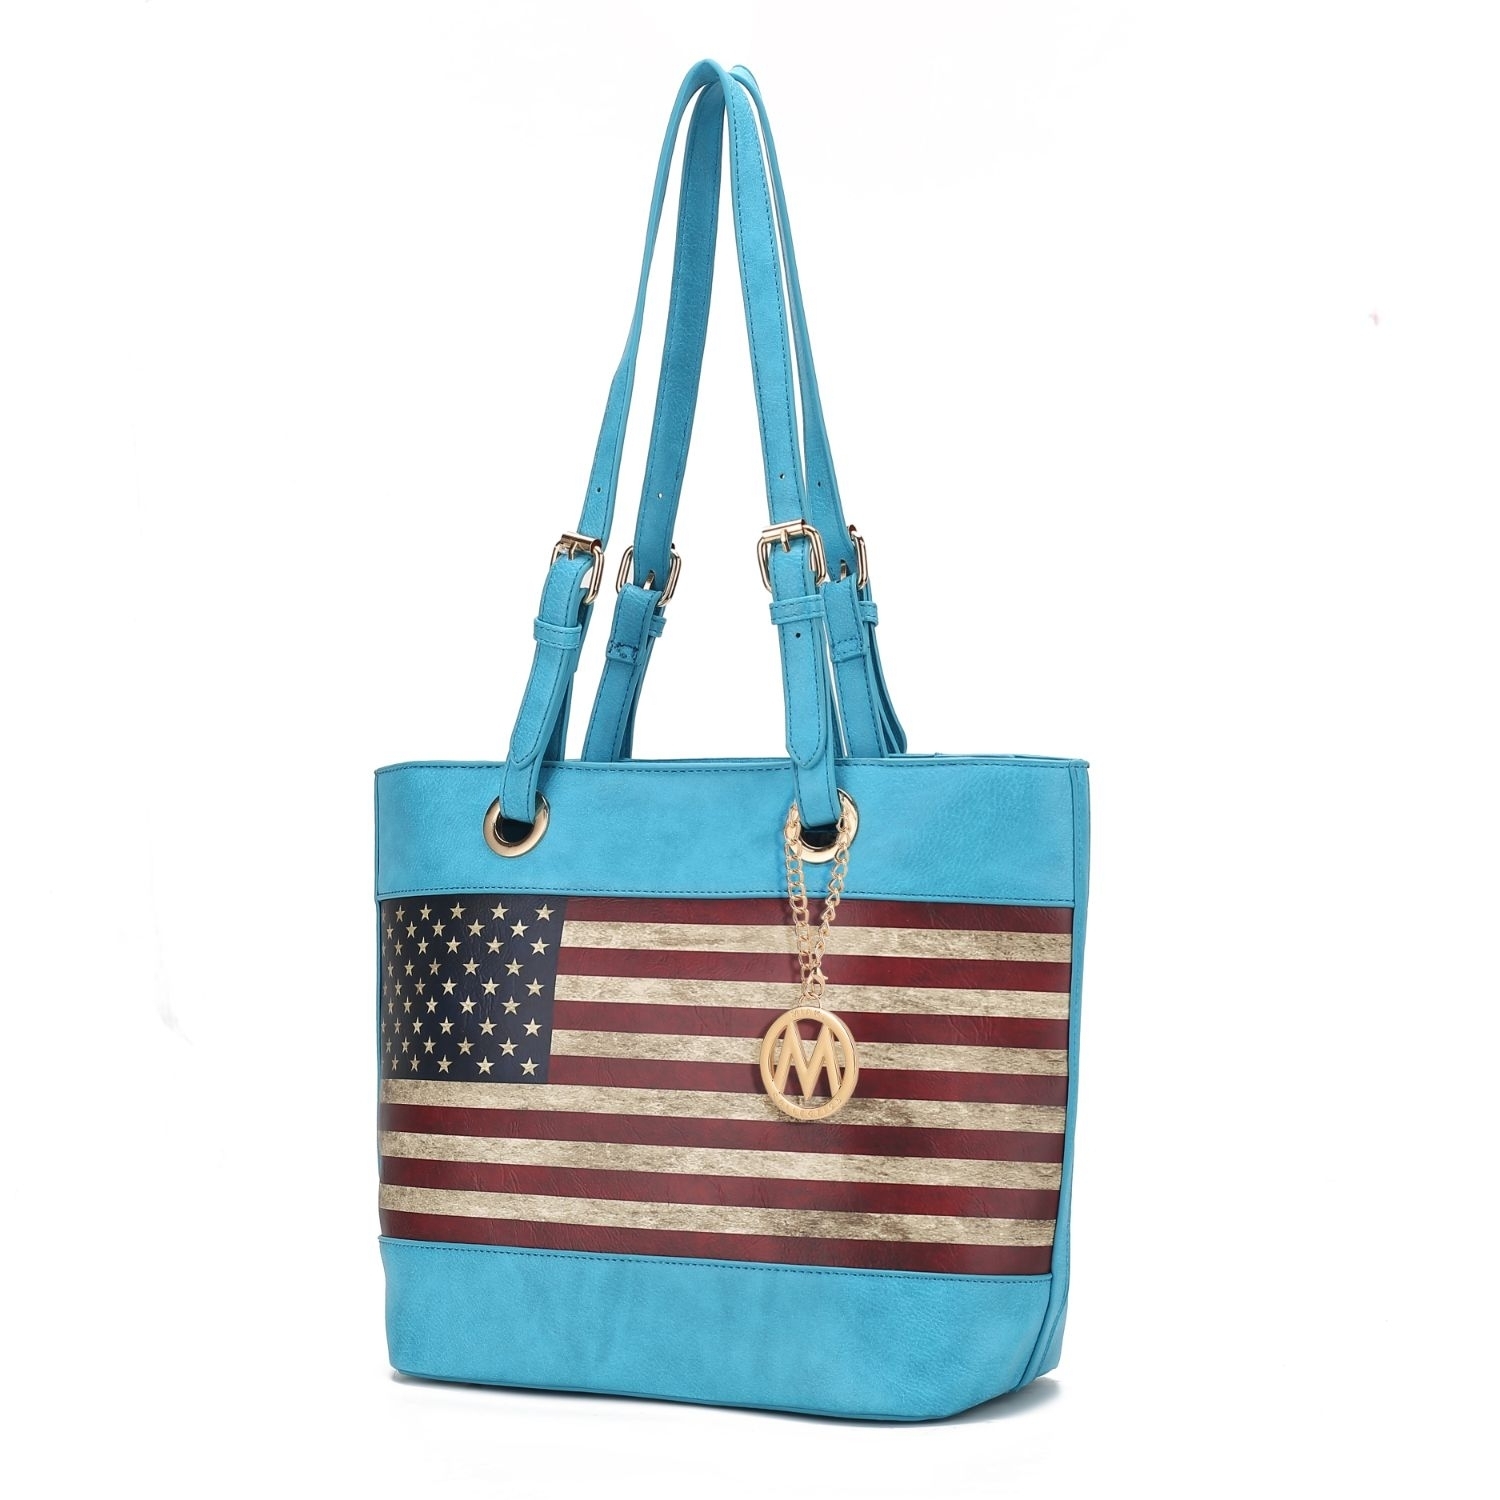 MKF Collection Vera Vegan Leather Patriotic Flag Pattern Women's Tote Bag By Mia K - Turquoise